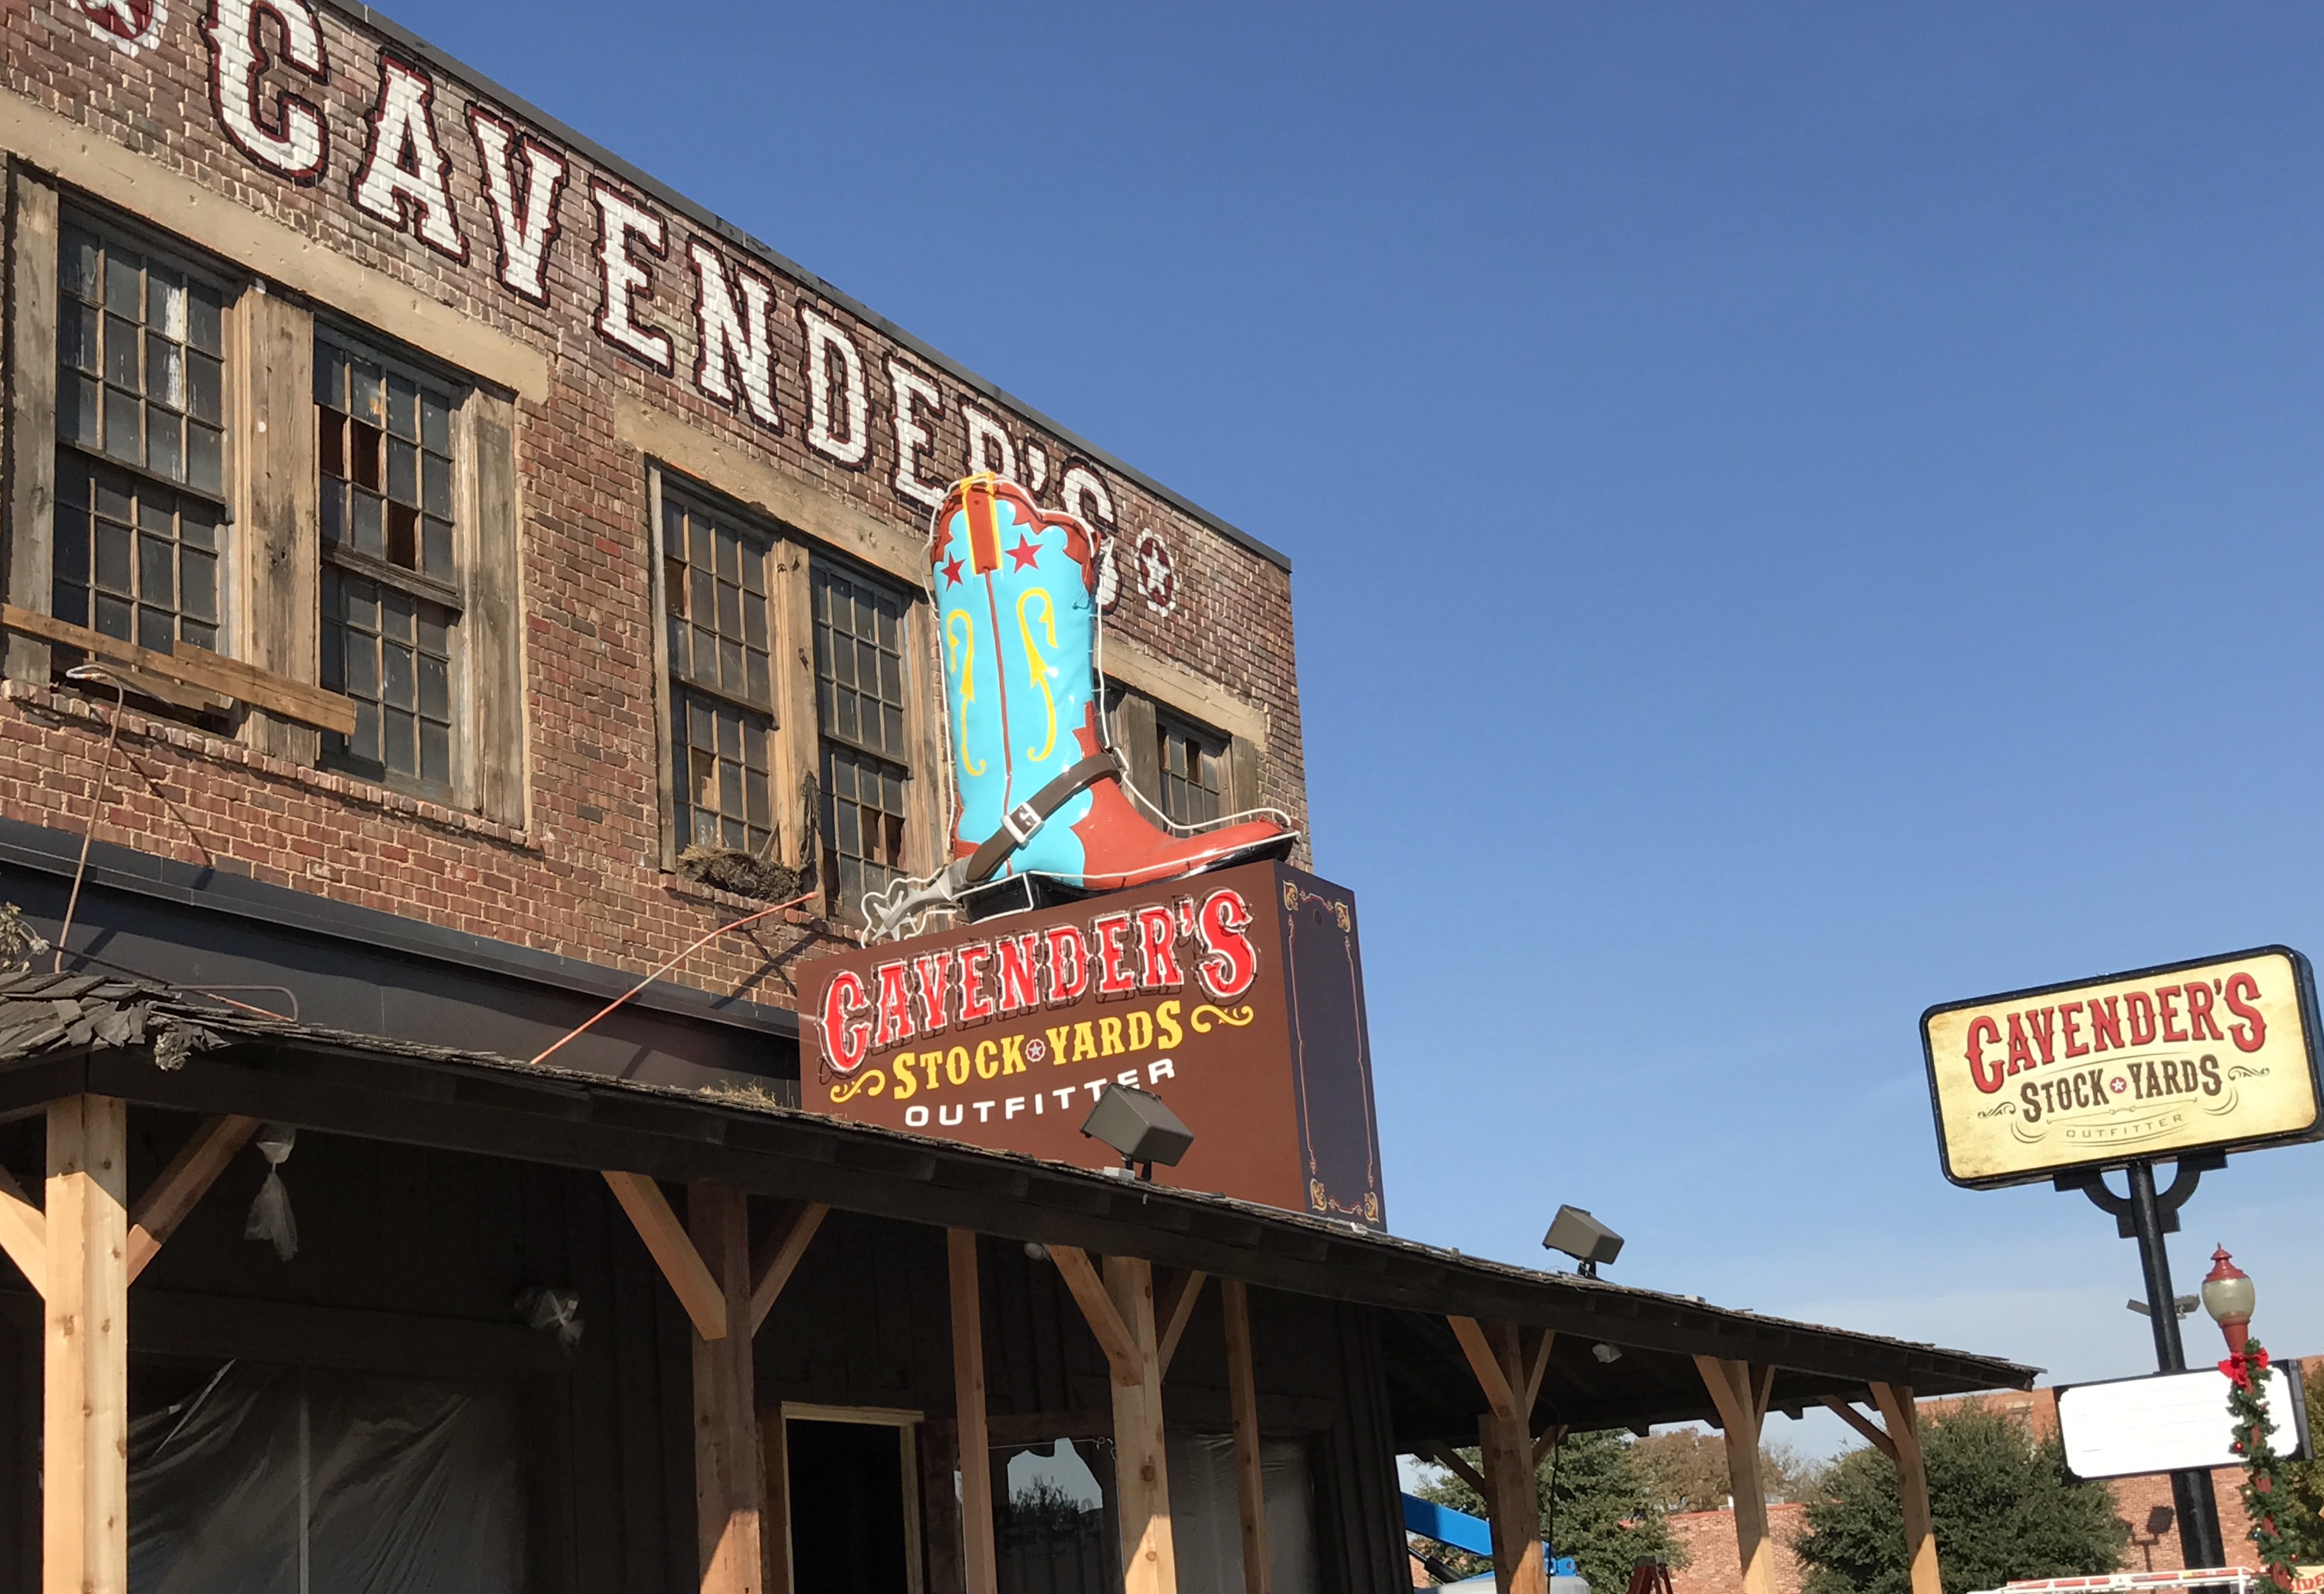 Cavender's Stock Yards In Fort Worth - Cowboys and Indians Magazine